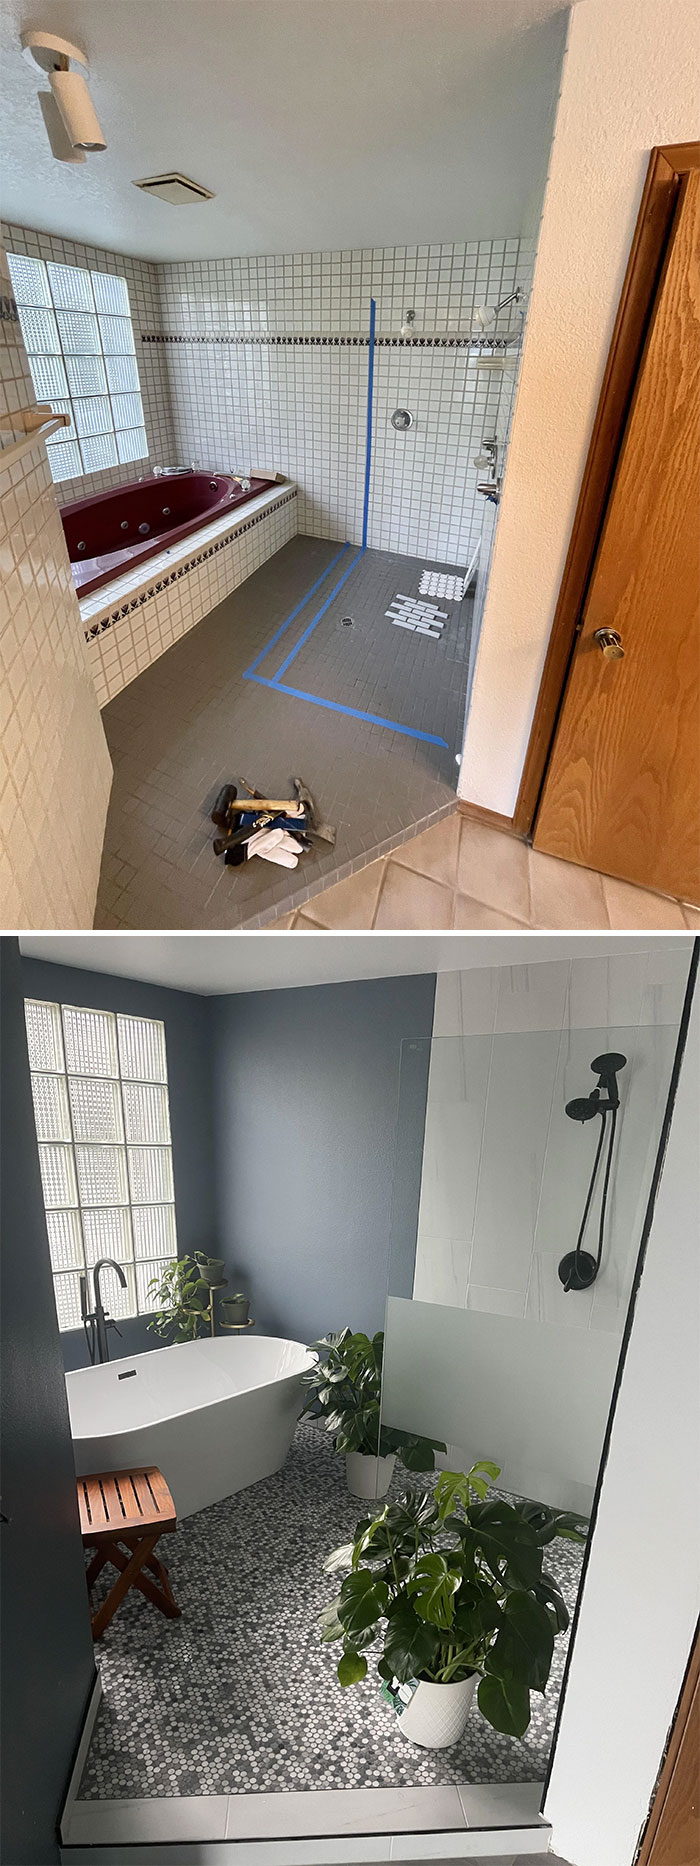 Shower- After/Before -Seattle Wa